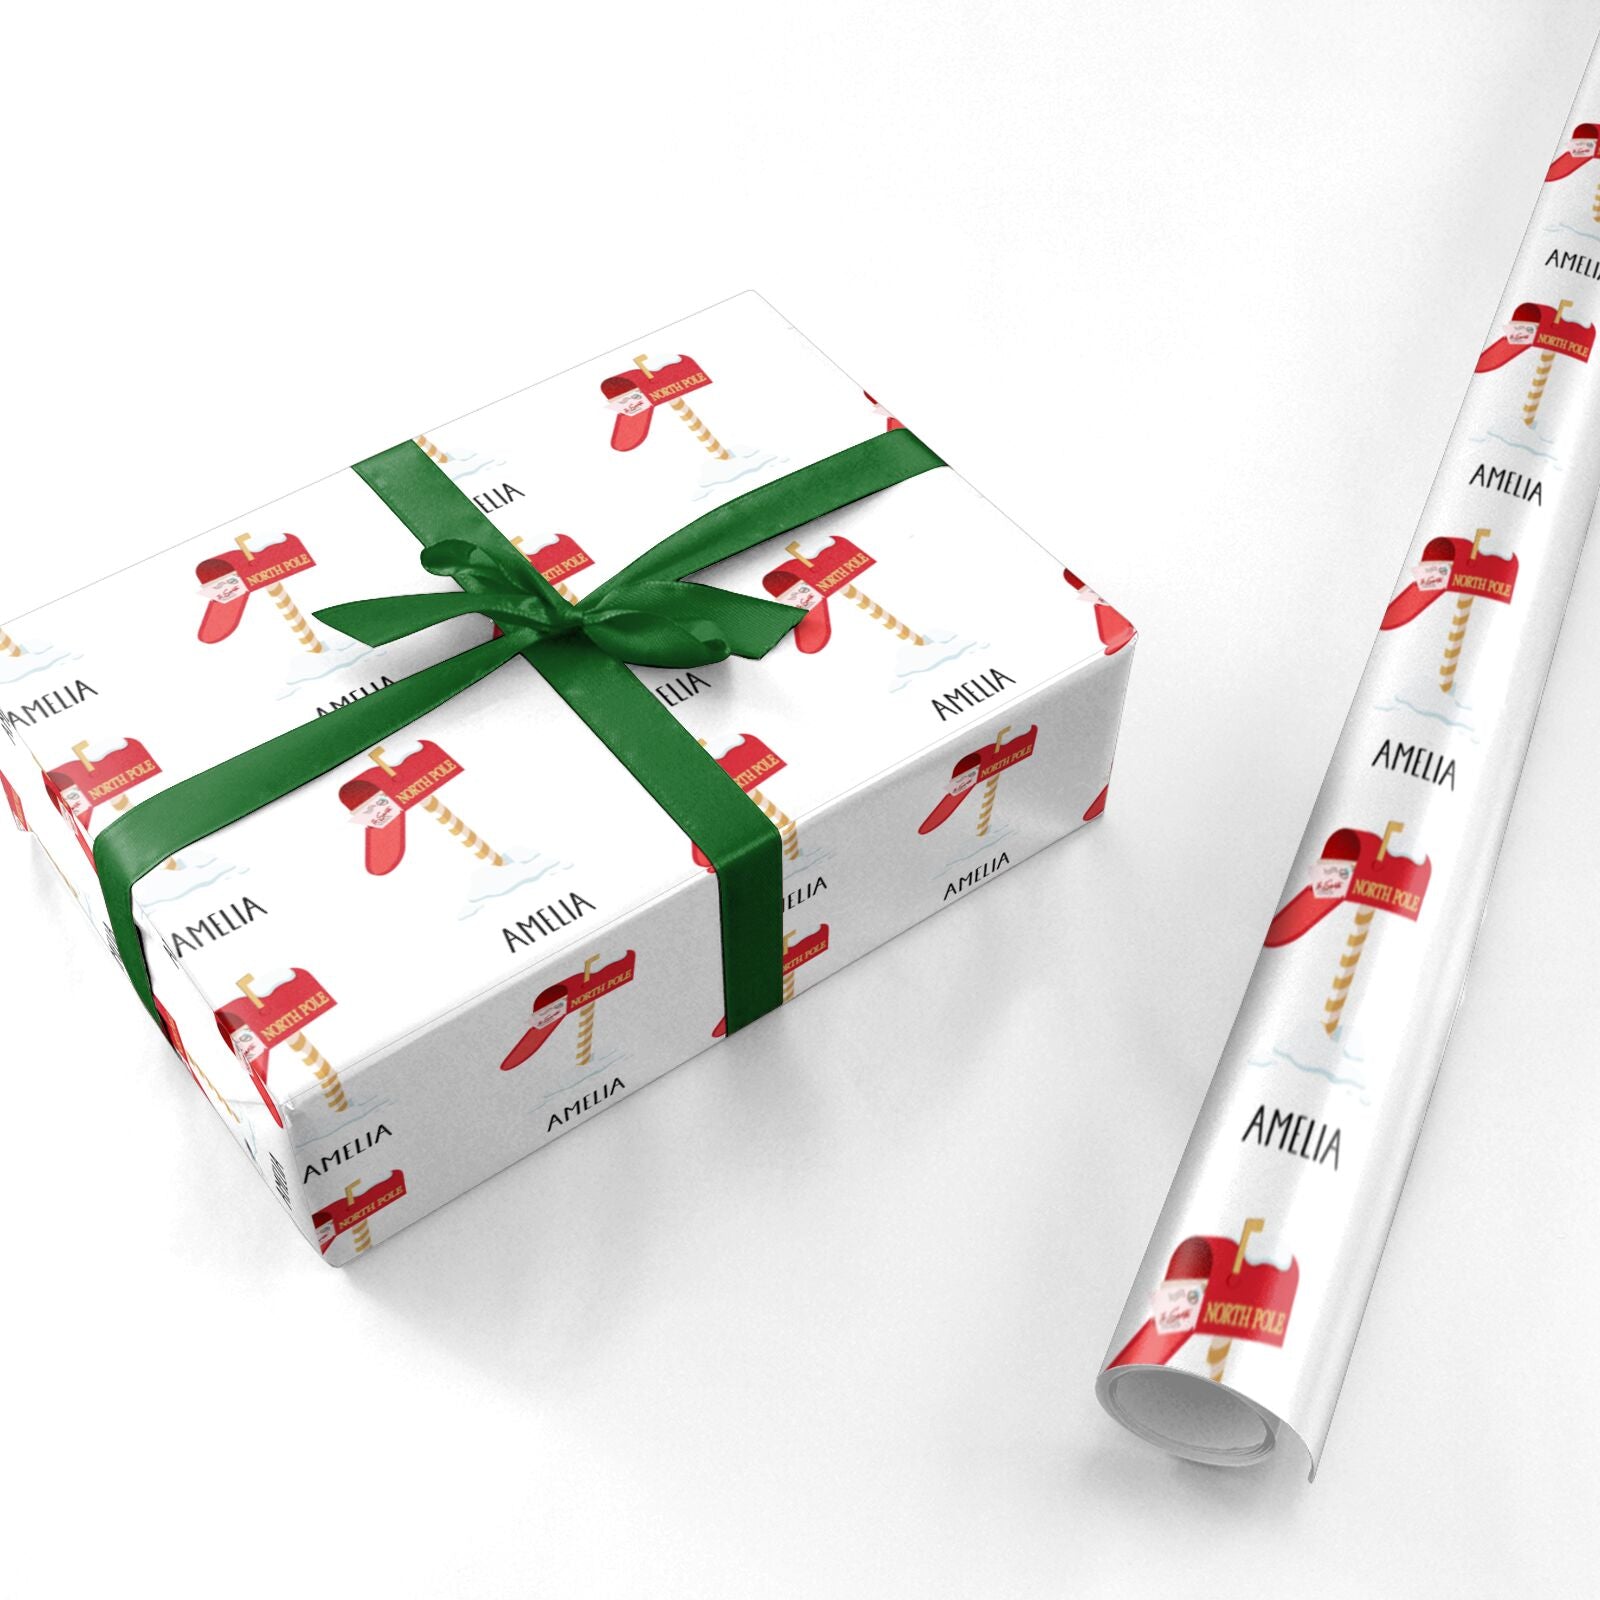 North Pole Express Personalised Wrapping Paper – Dyefor